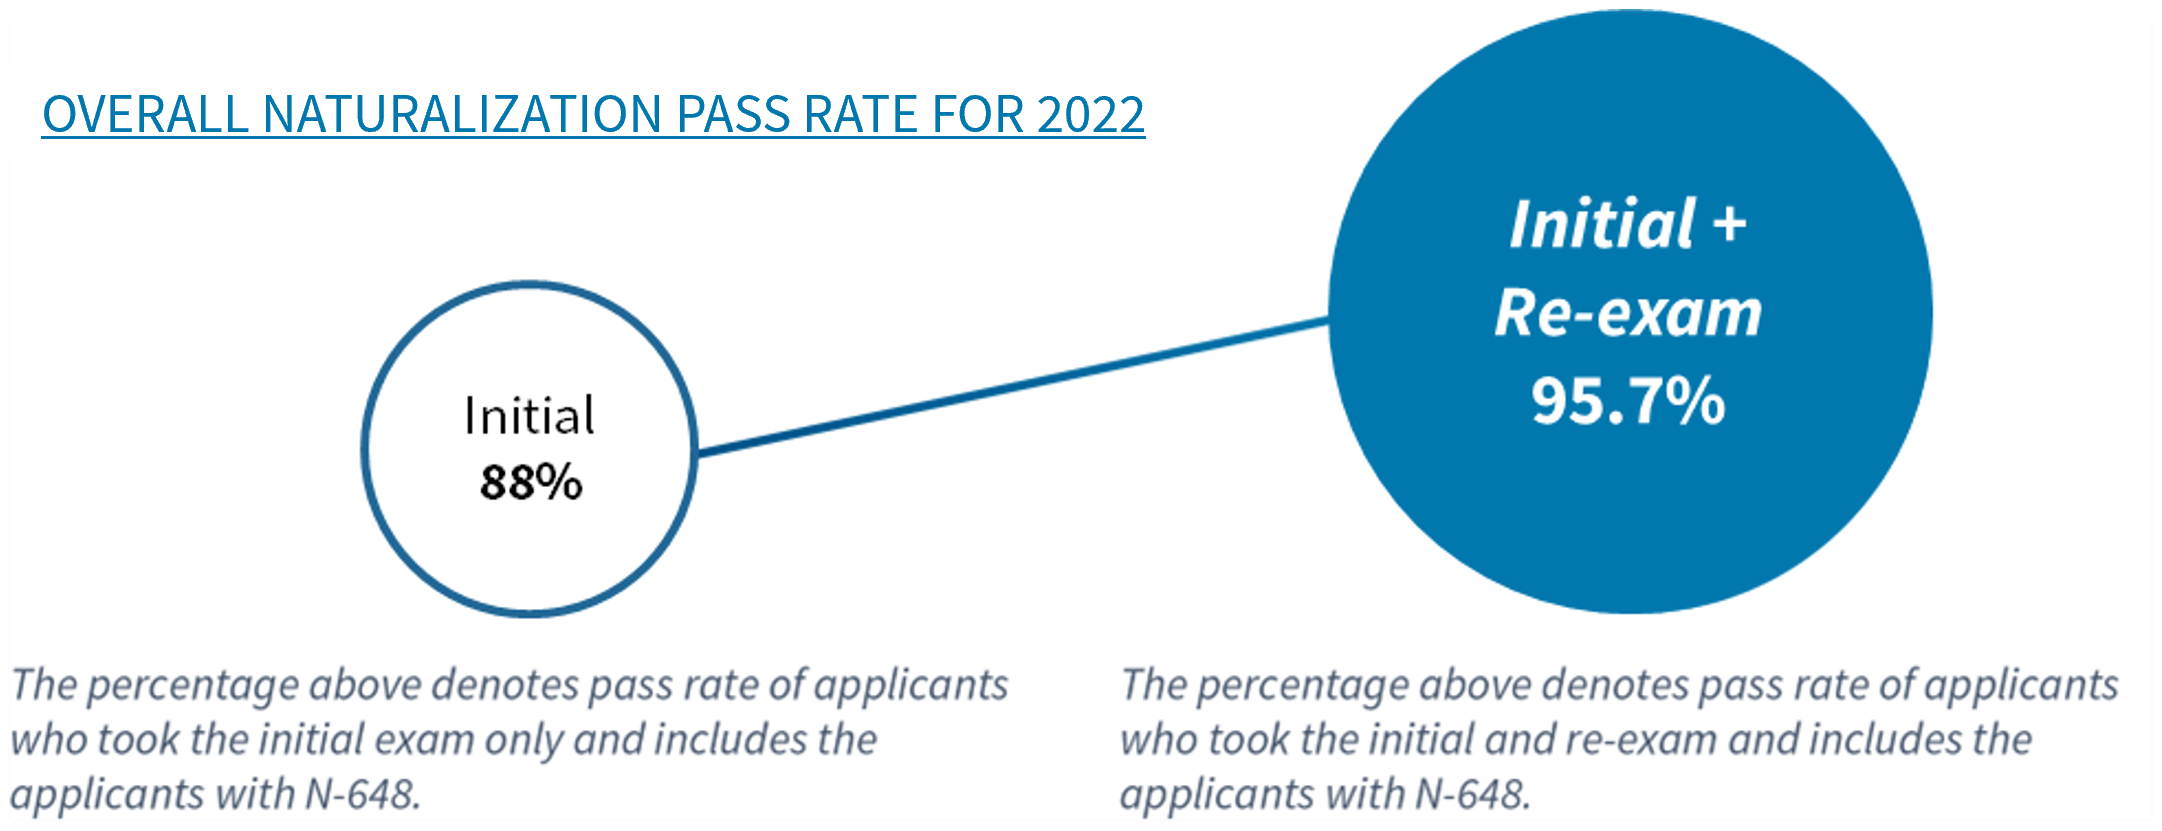 Overall Naturalization Pass Rate for 2022